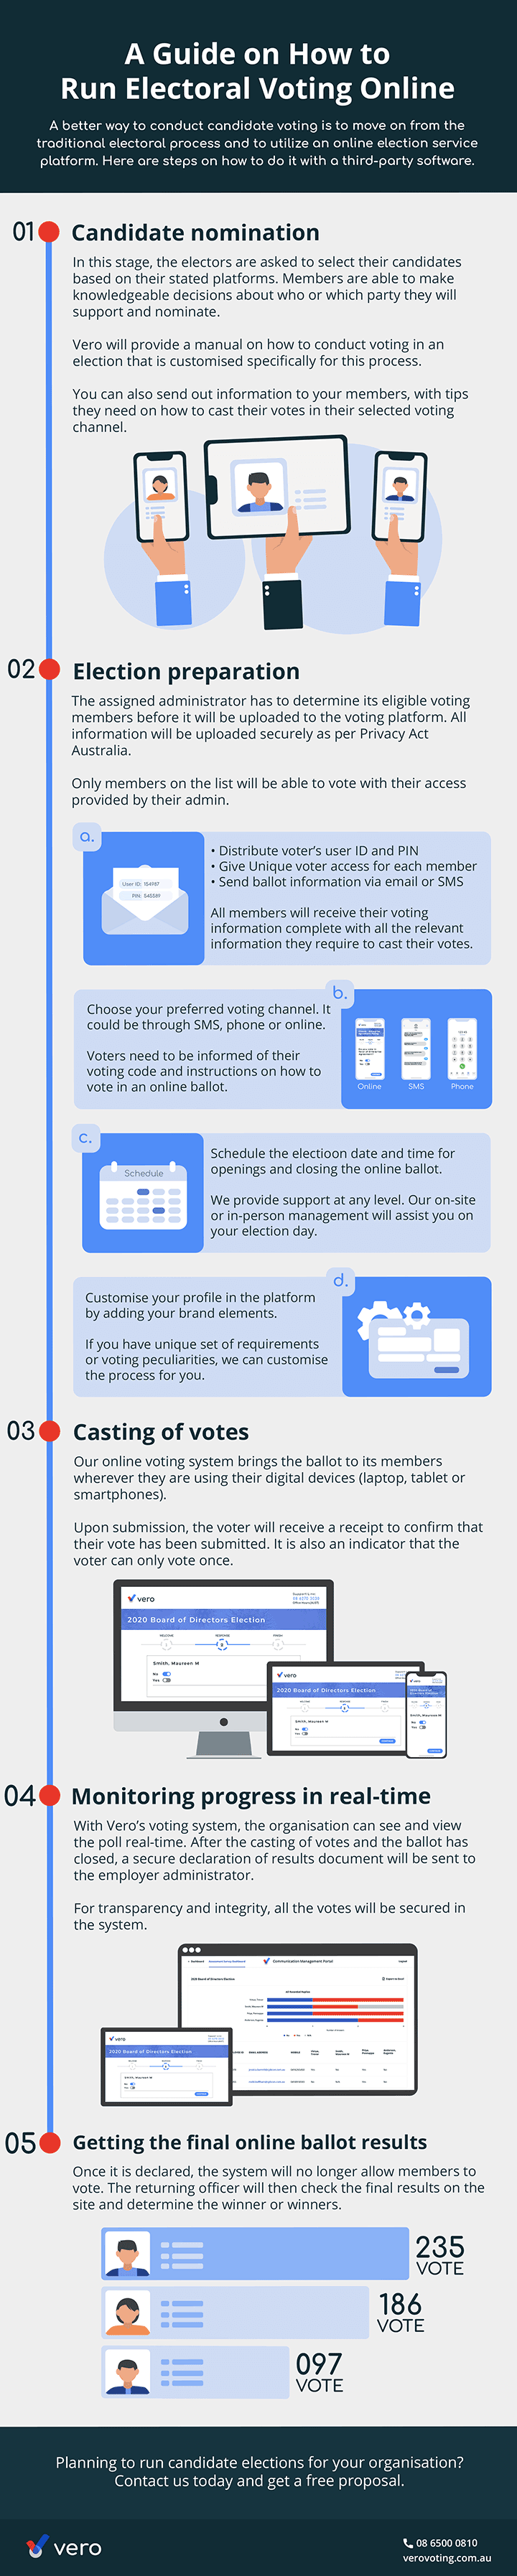 how-electoral-voting-works-and-best-for-private-organisation-graphics